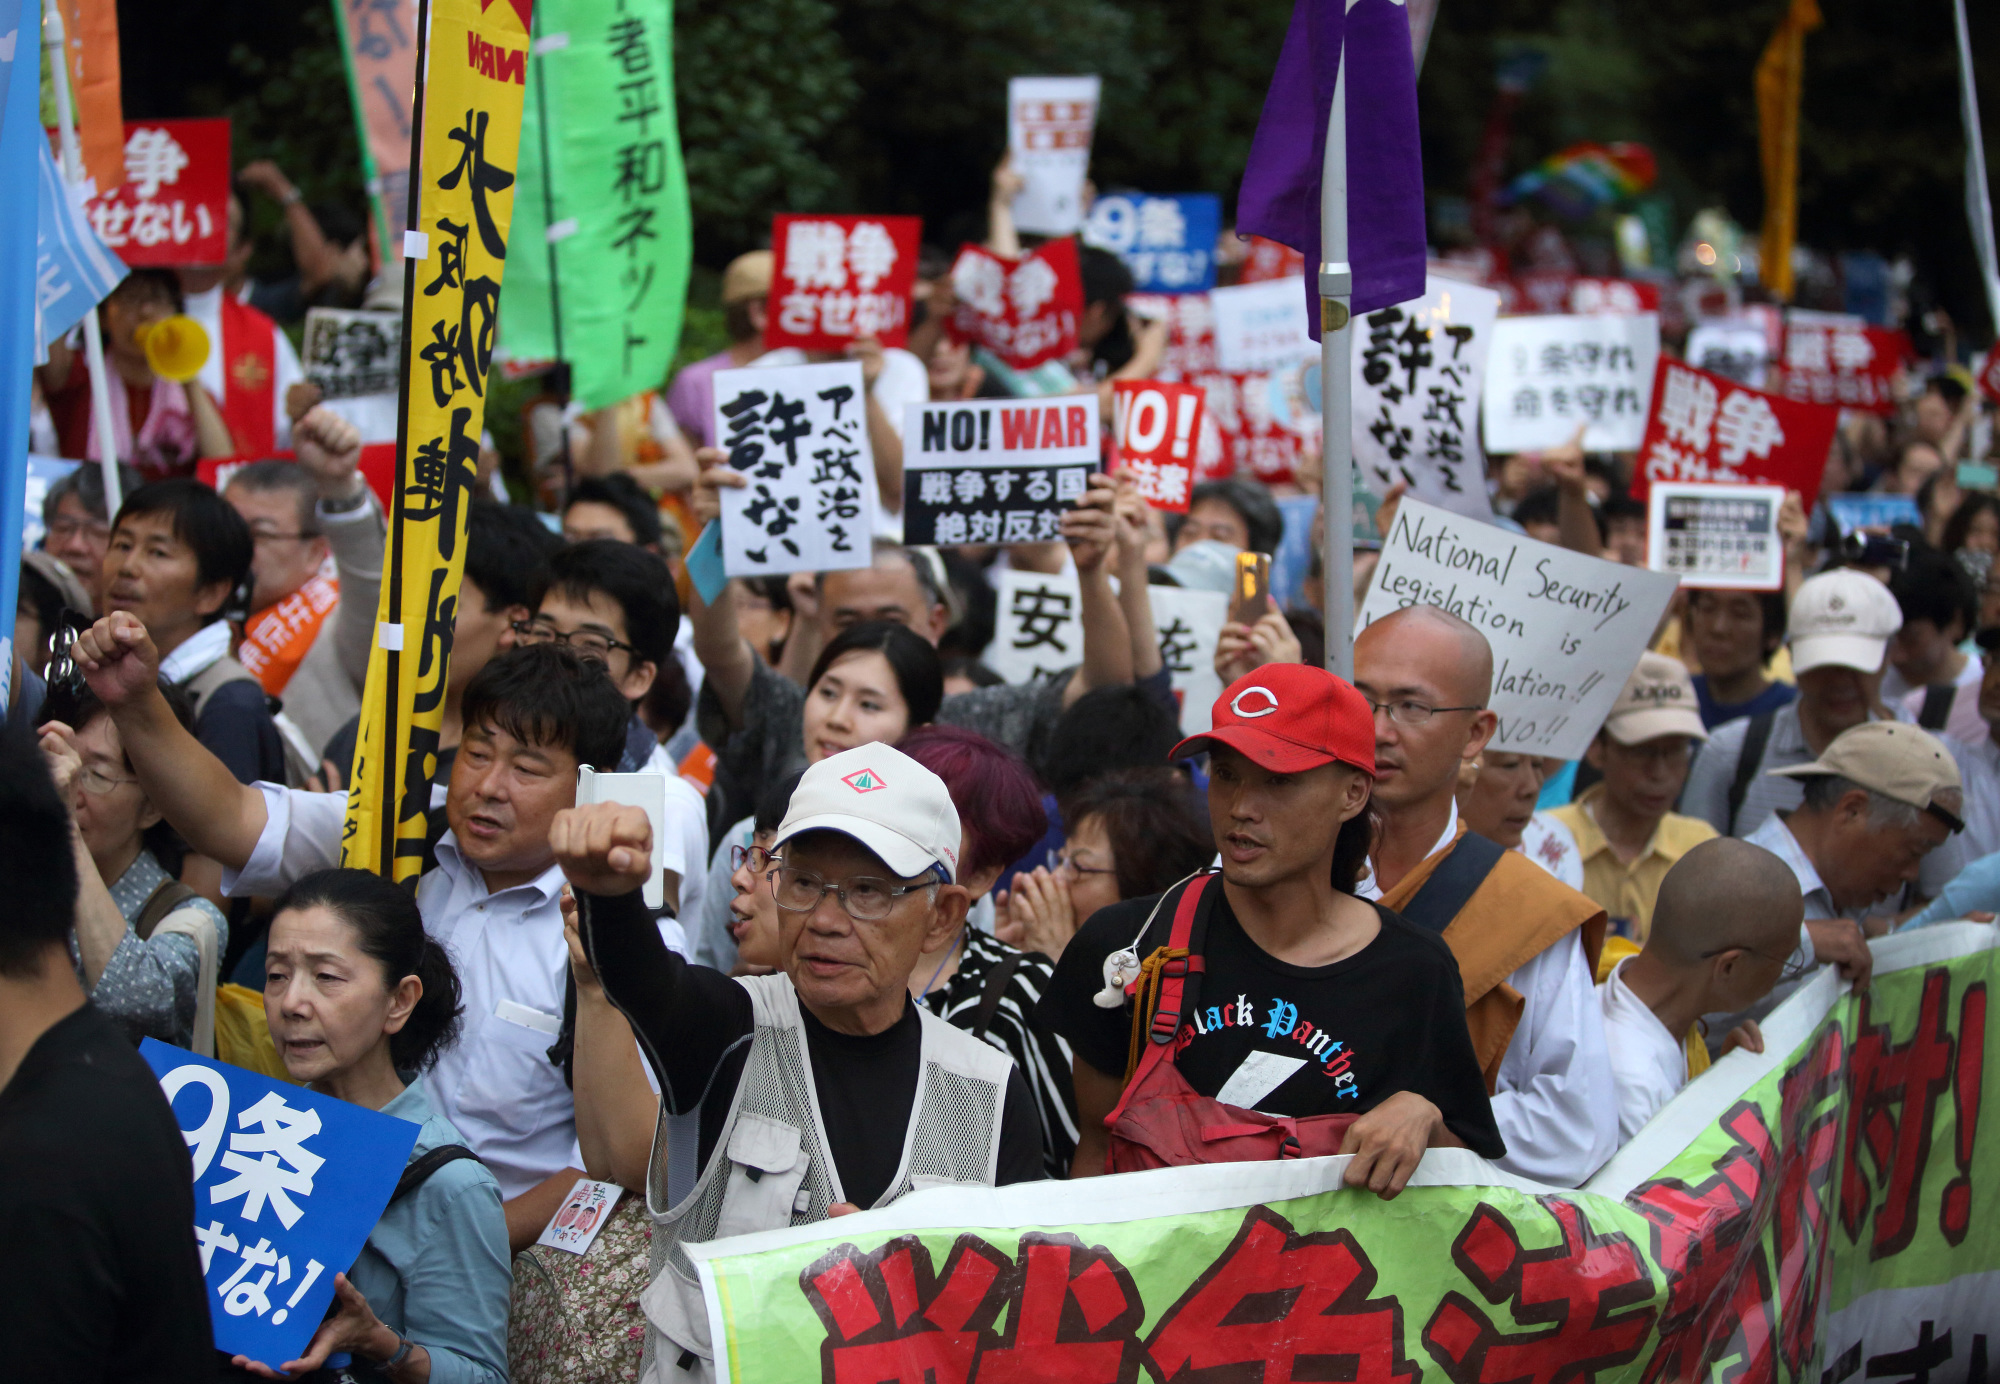 Loud and proud: Protesters take part in a rally against the security bills in Tokyo in 2015. | BLOOMBERG